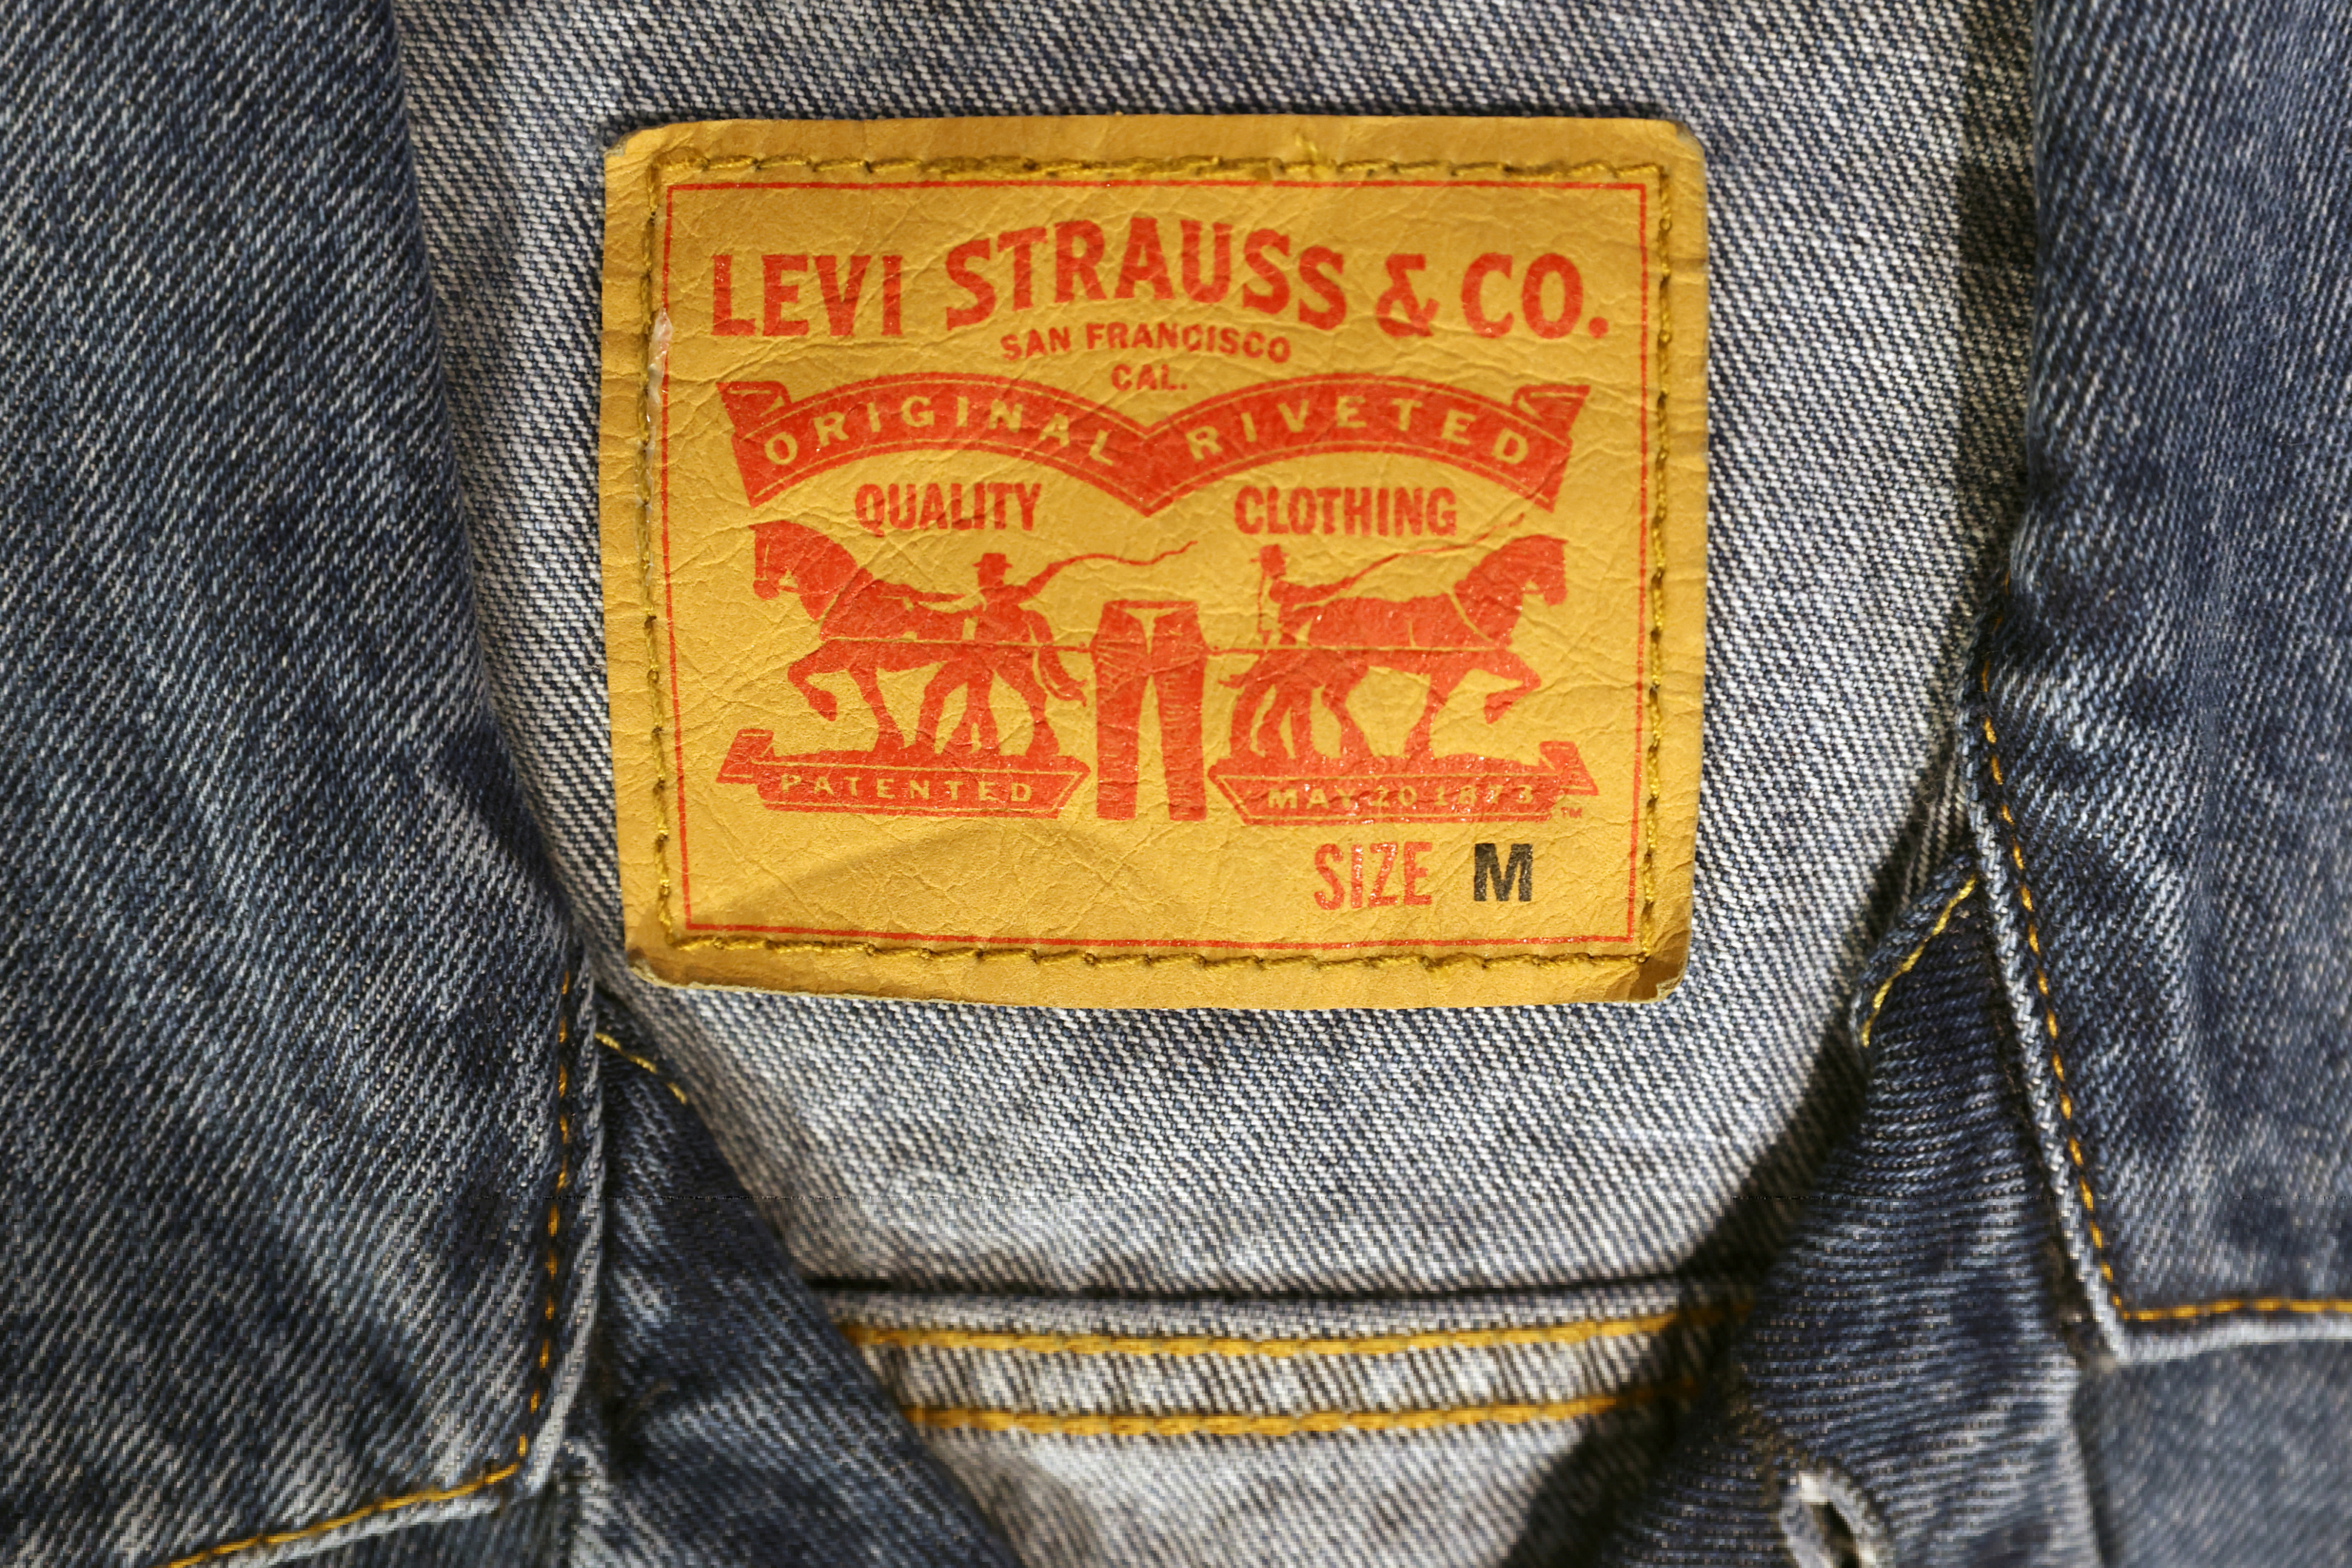 Psicológico infinito Clancy Levi Strauss results top estimates on strong demand, price hikes | Reuters